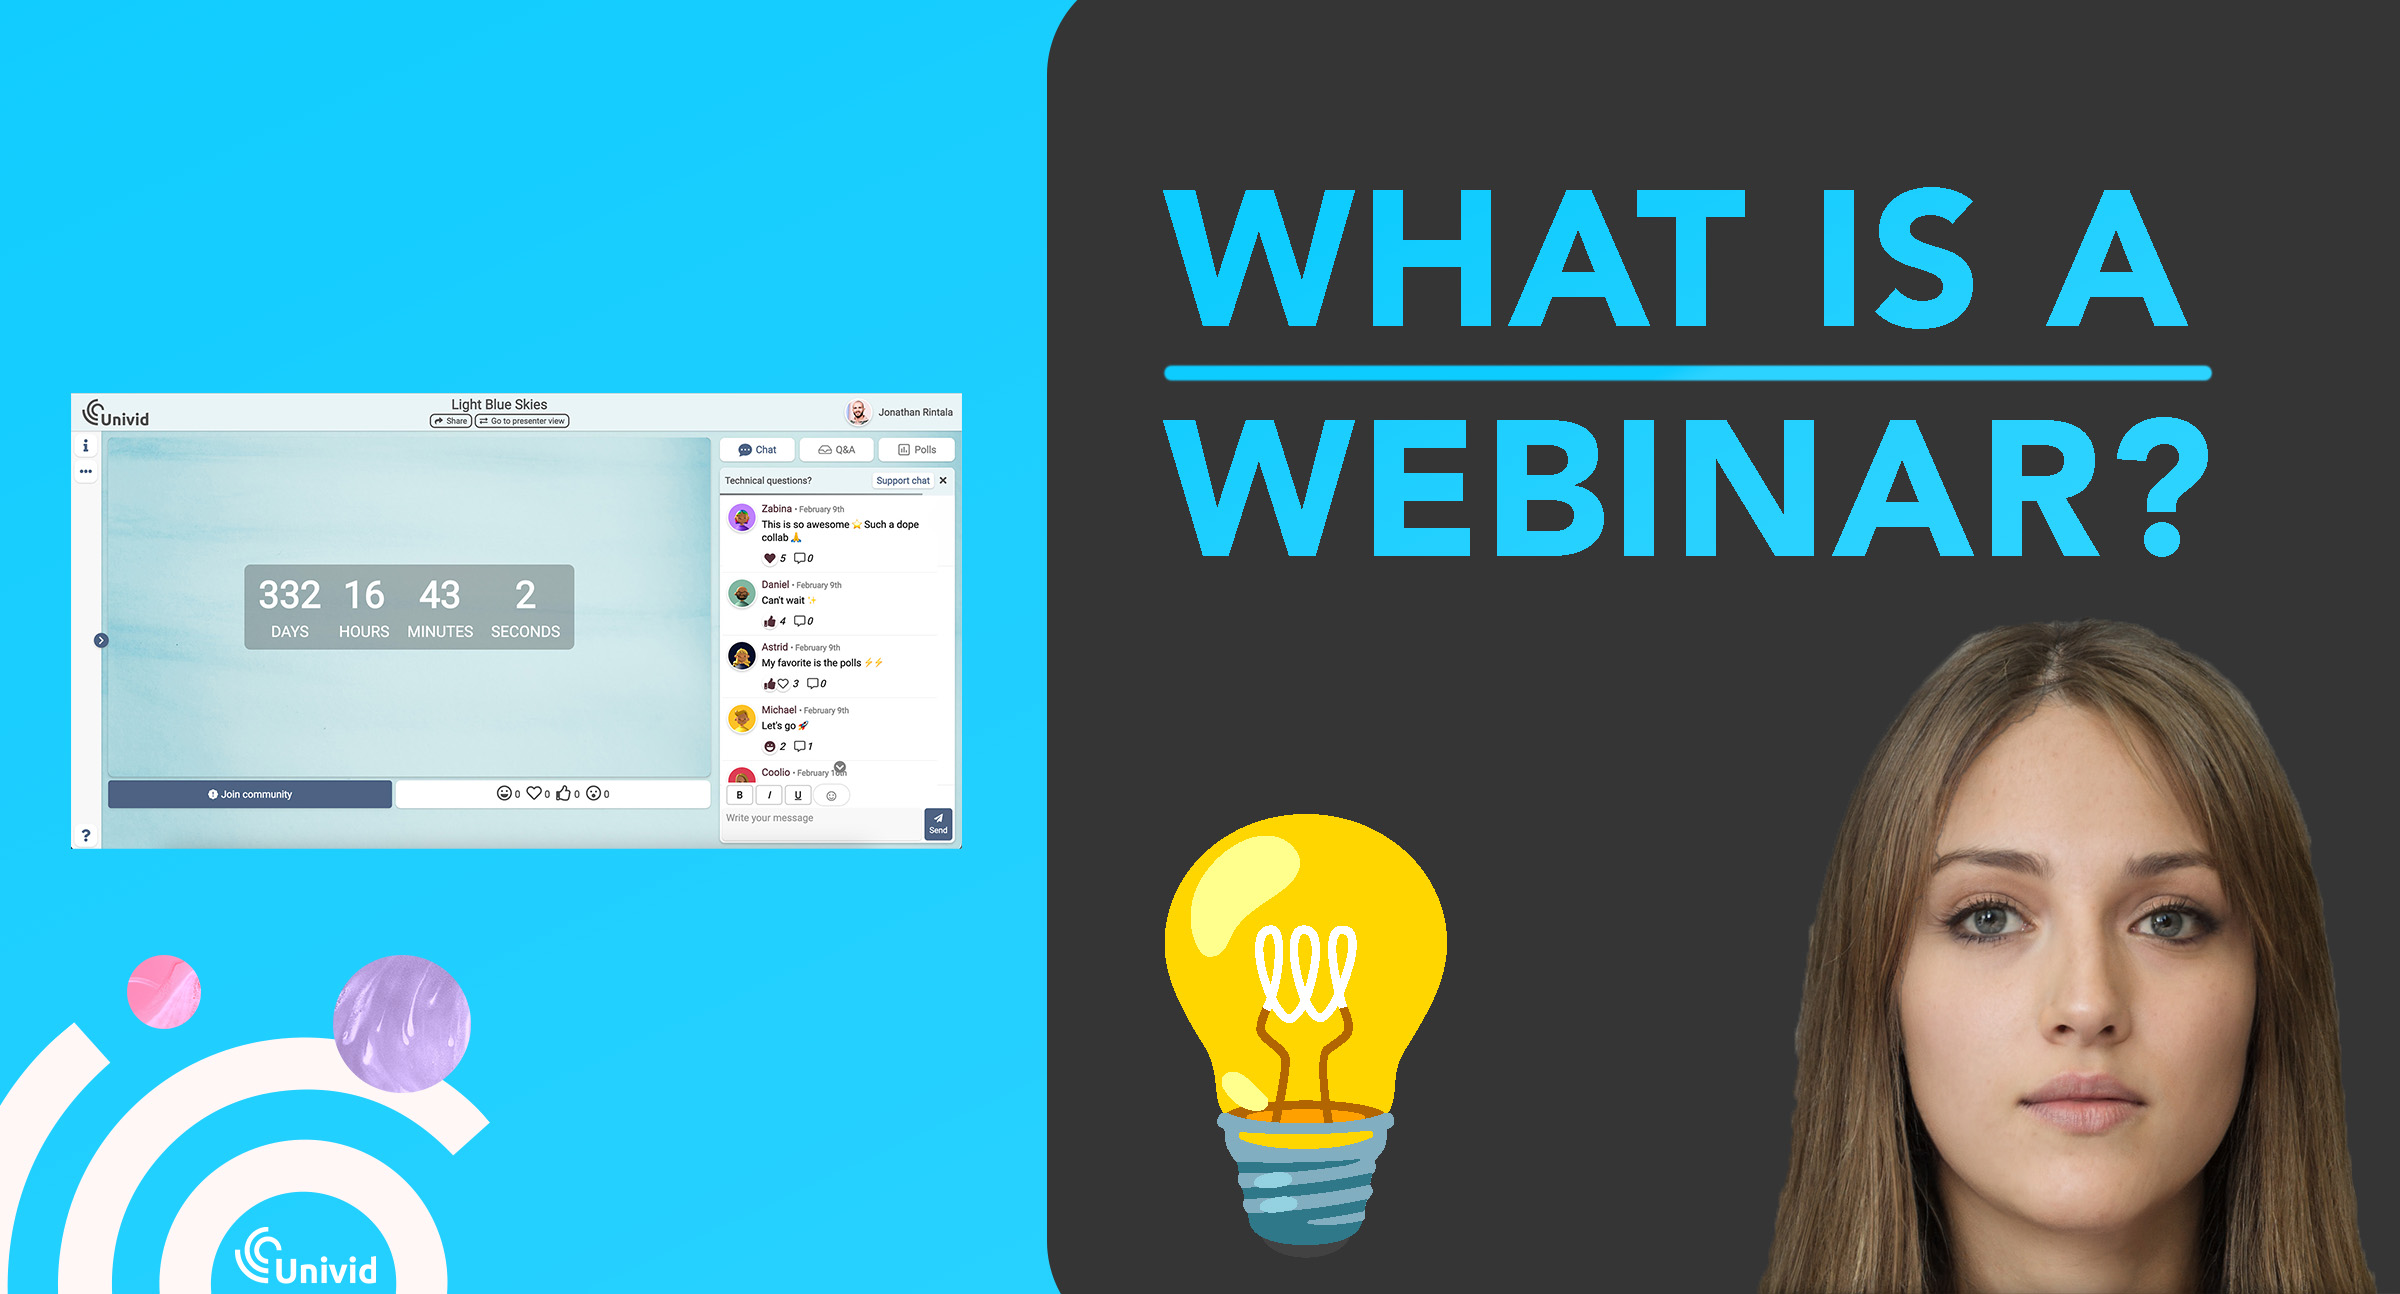 A webinar is an online seminar that allows participants from anywhere to participate and learn valuable knowledge. Learn how and what types of webinars exist.